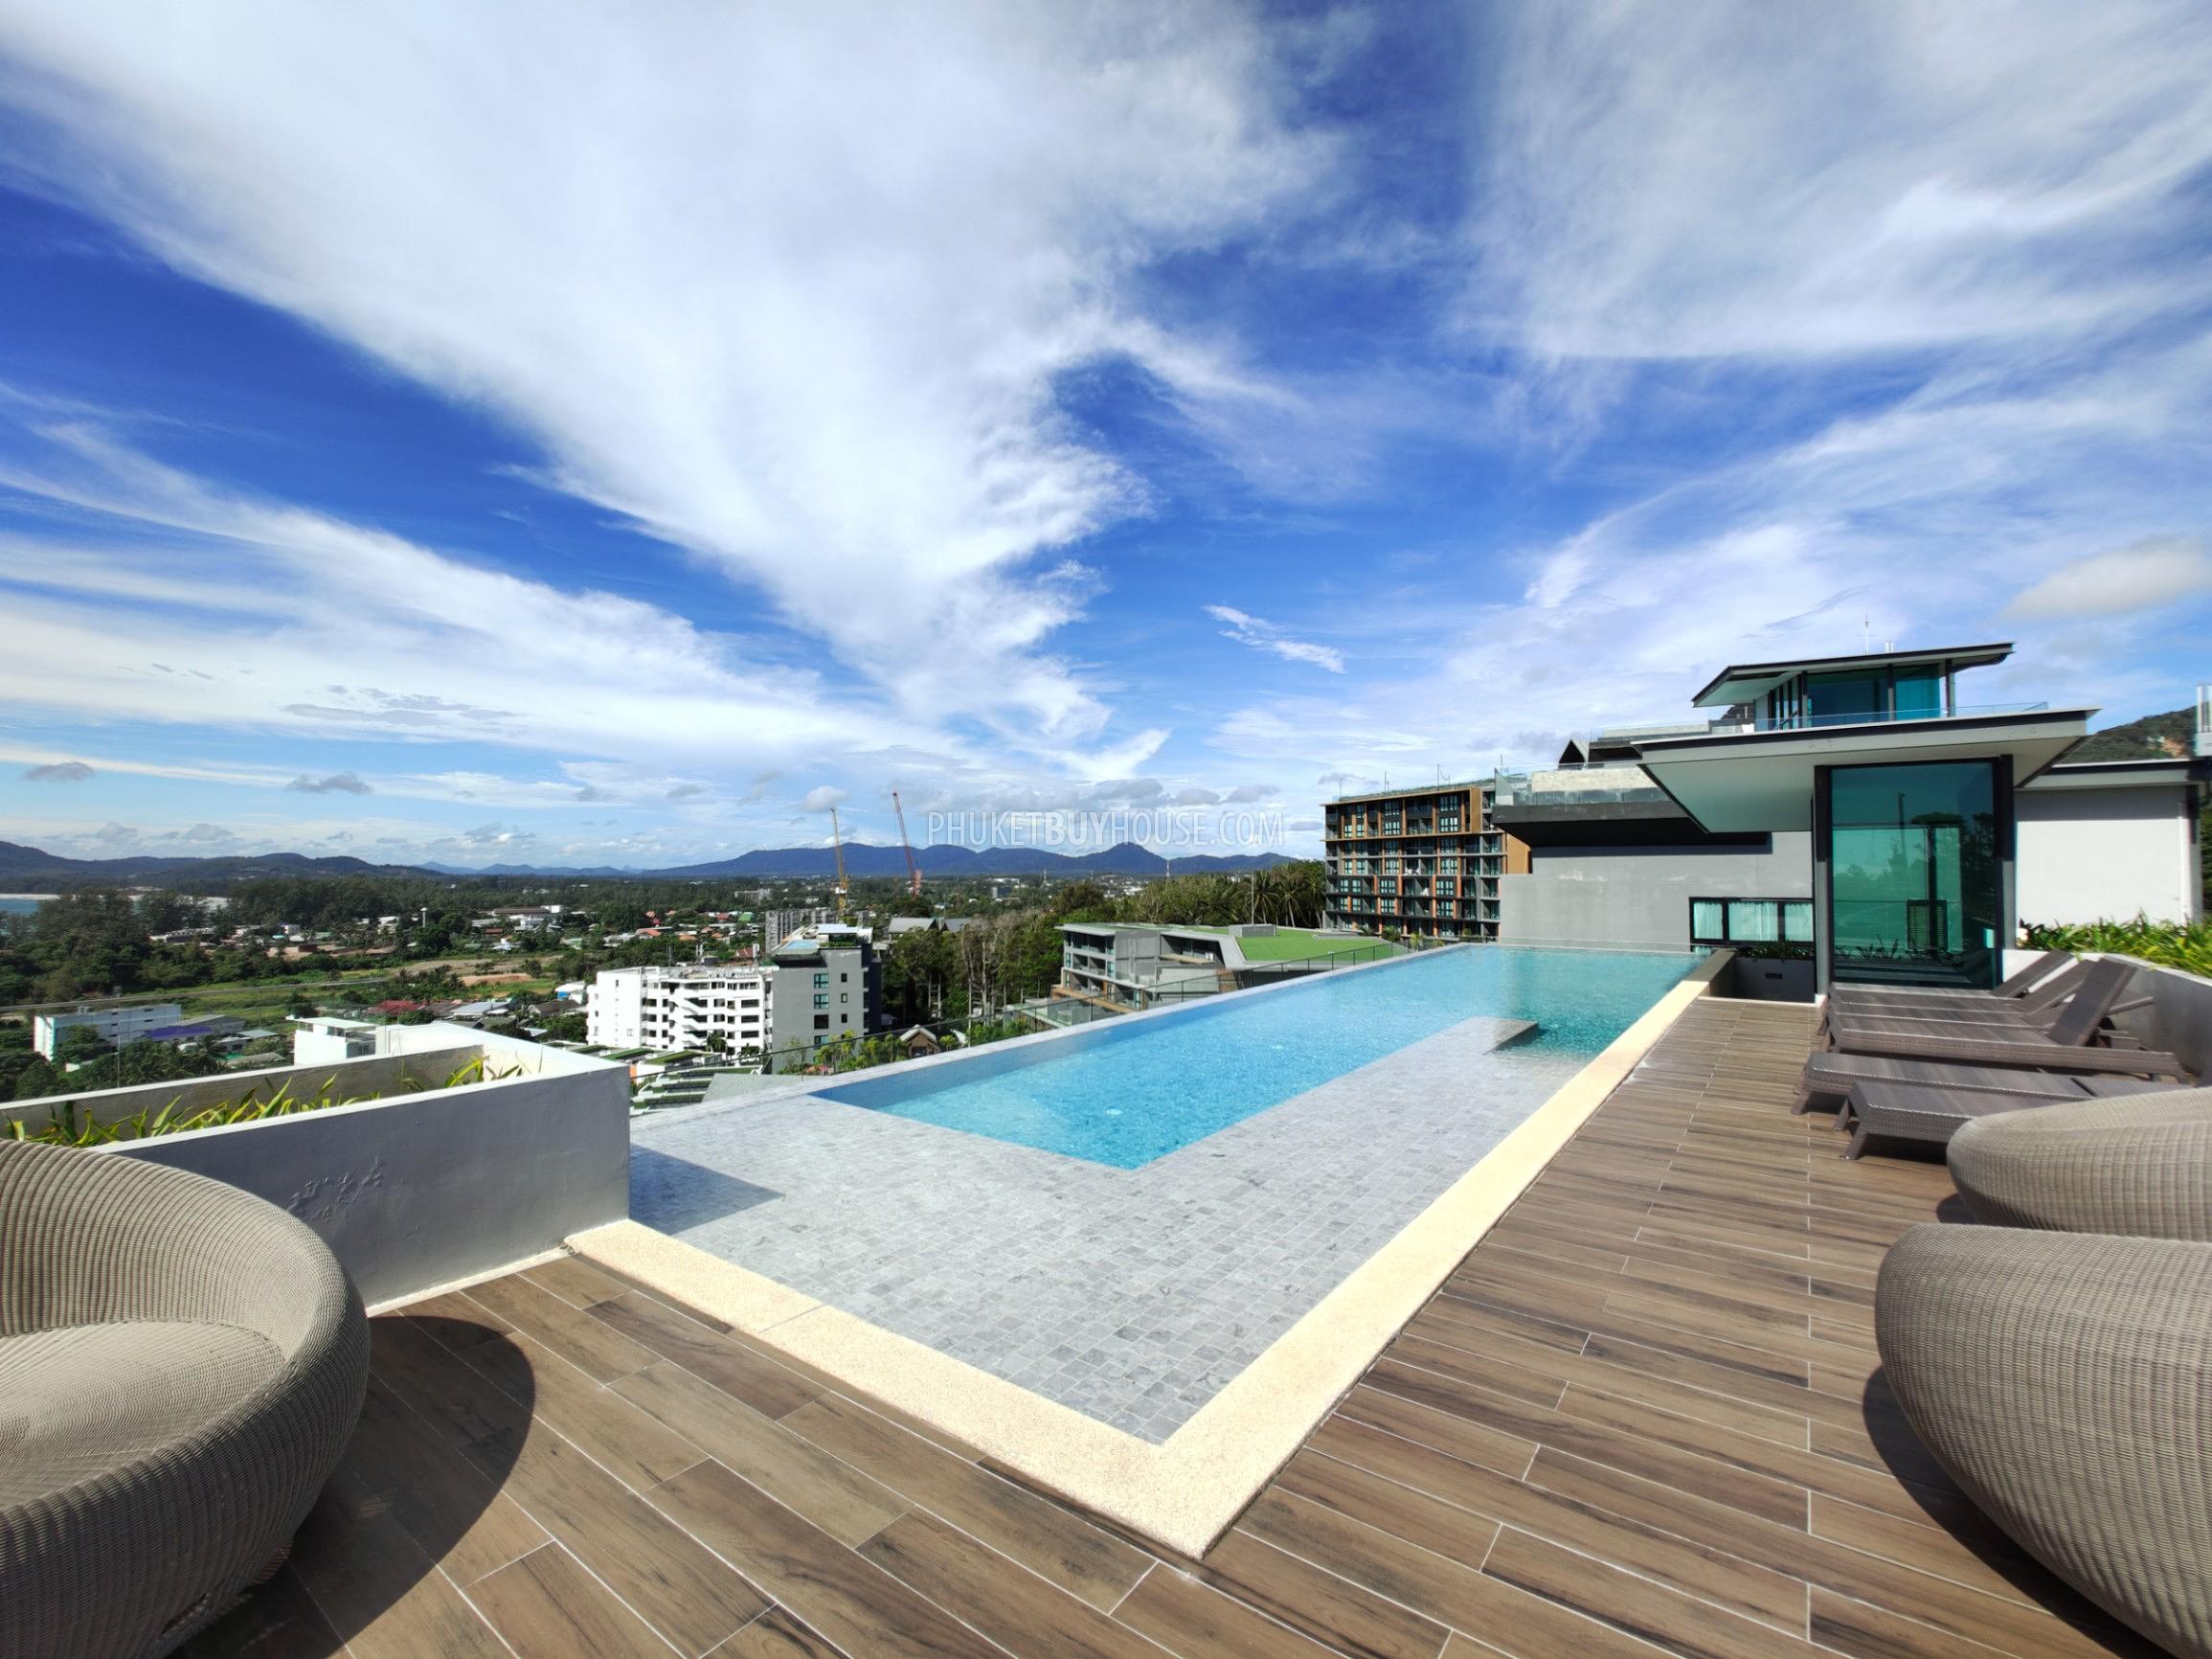 SUR22000: Irresistible Panoramic View from This Three Bedroom Apartment in Surin. Photo #2